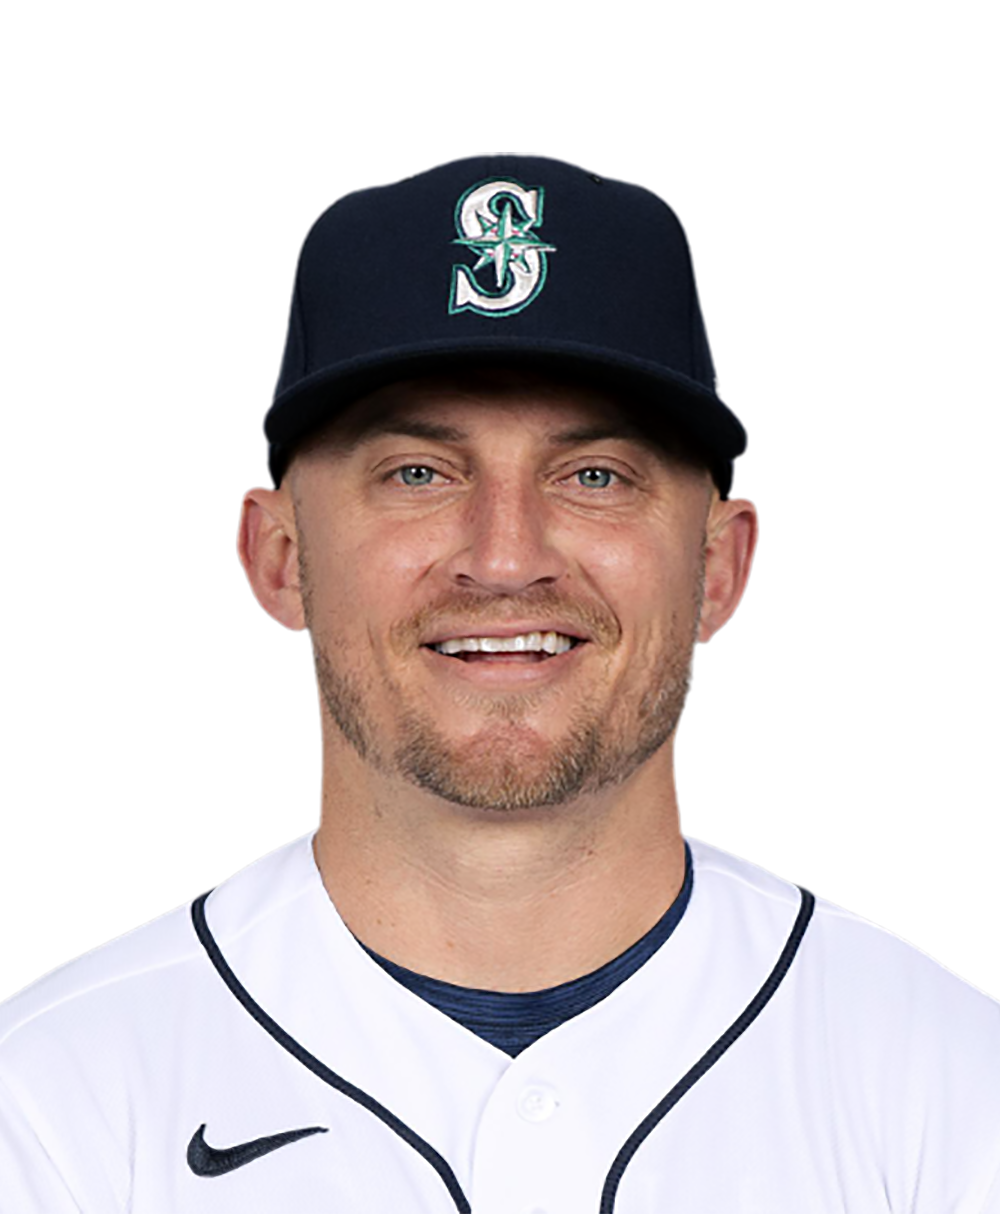 The Mariners Should Bring Back Kyle Seager in 2022